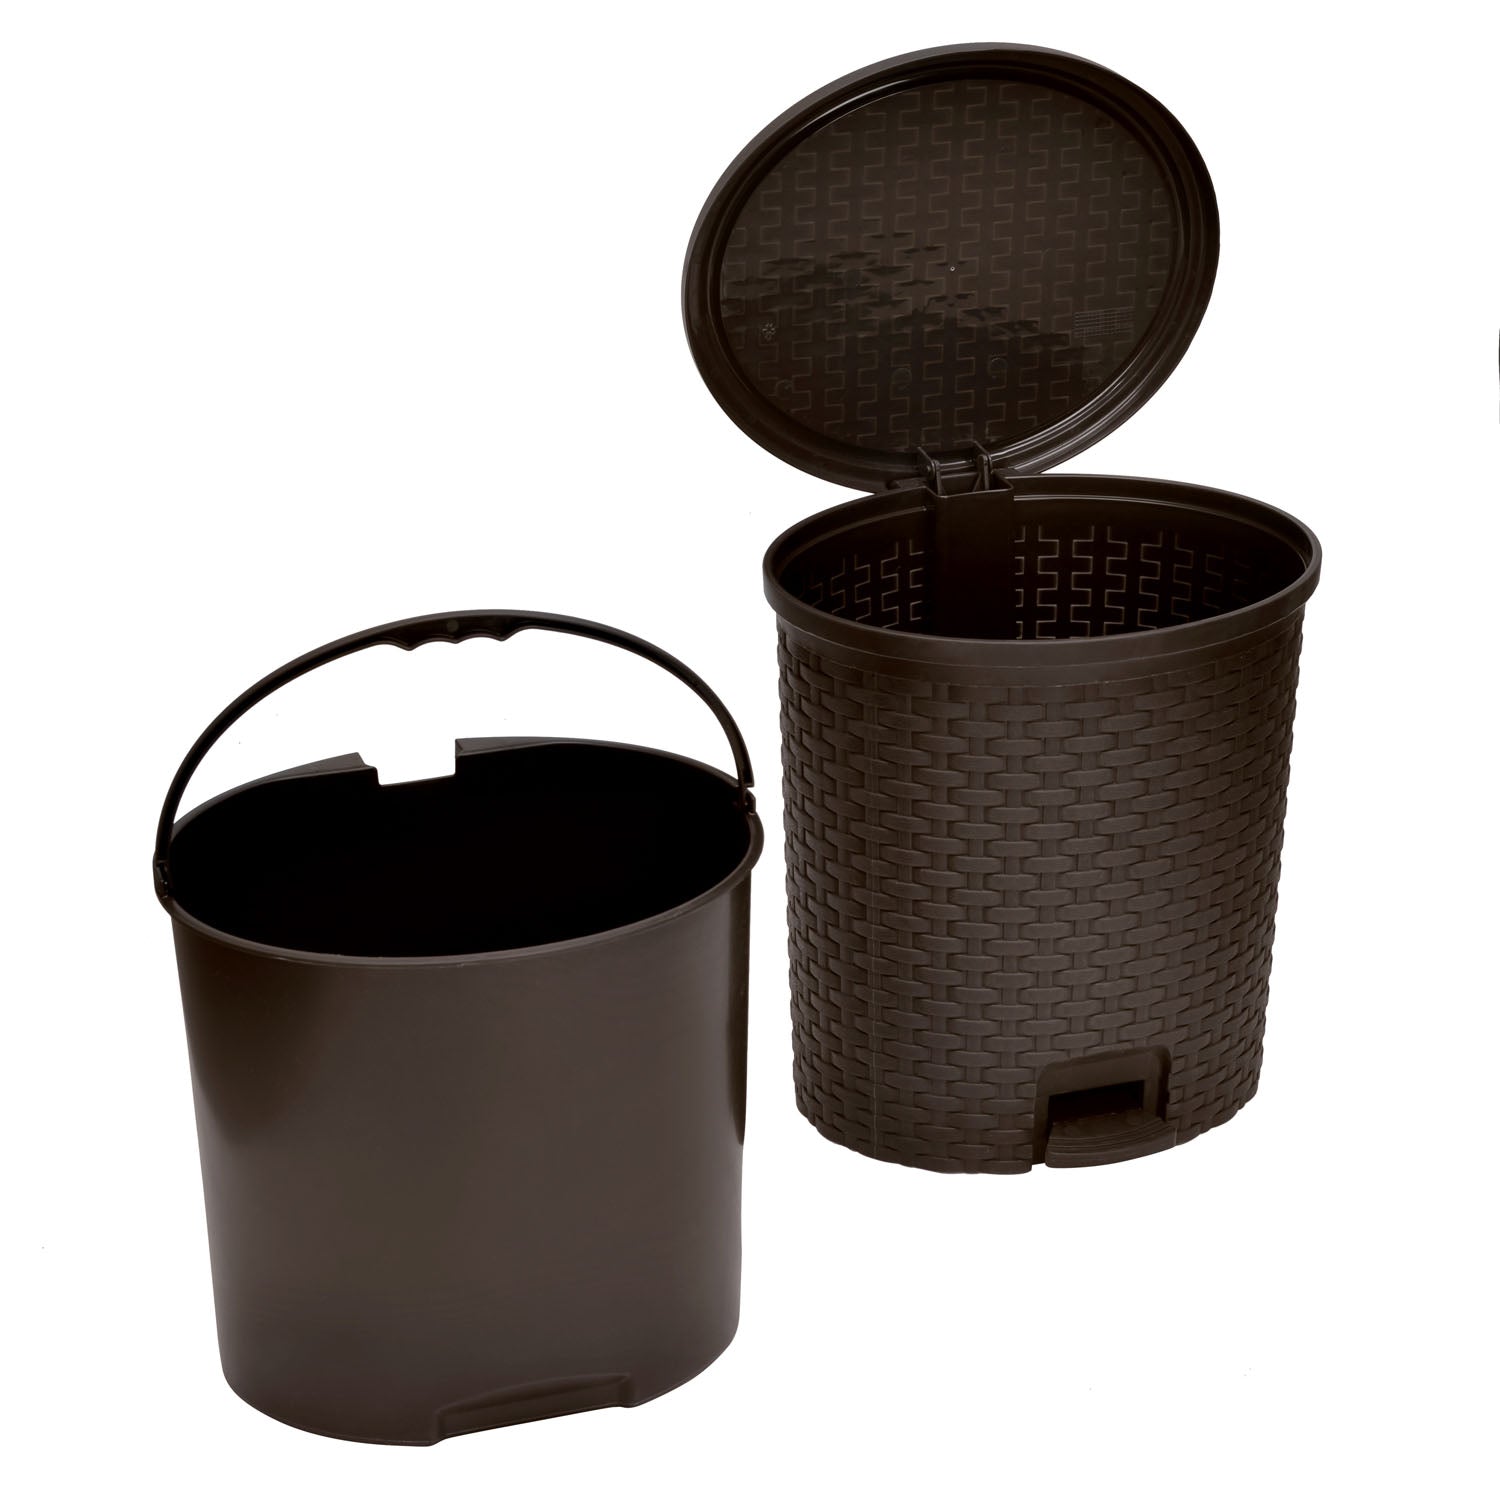 @home by Nilkamal Home Paddle Dustbin 12 Liter Charcoal Grey